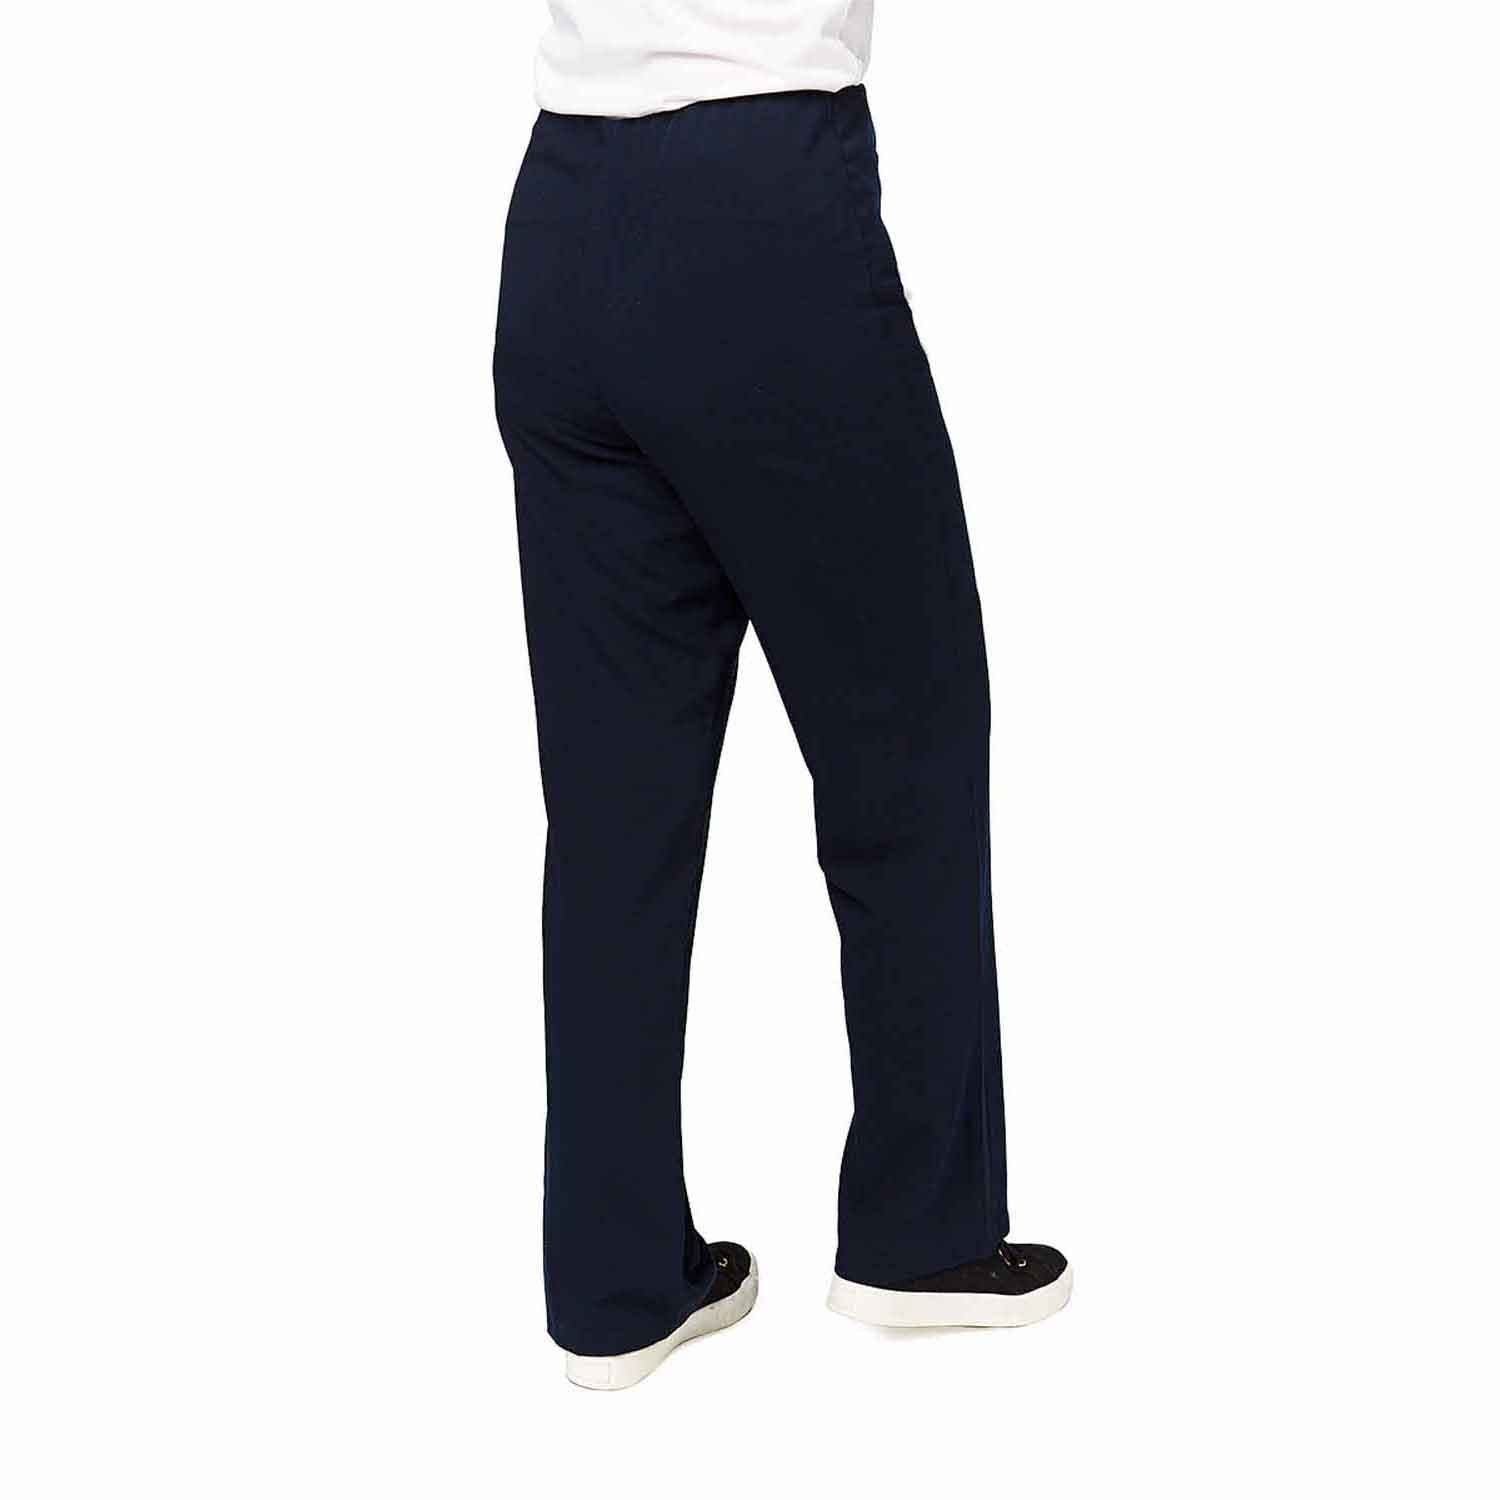 Tigiwear Jersey Light Weight Trousers - Navy 3 Shaws Department Stores